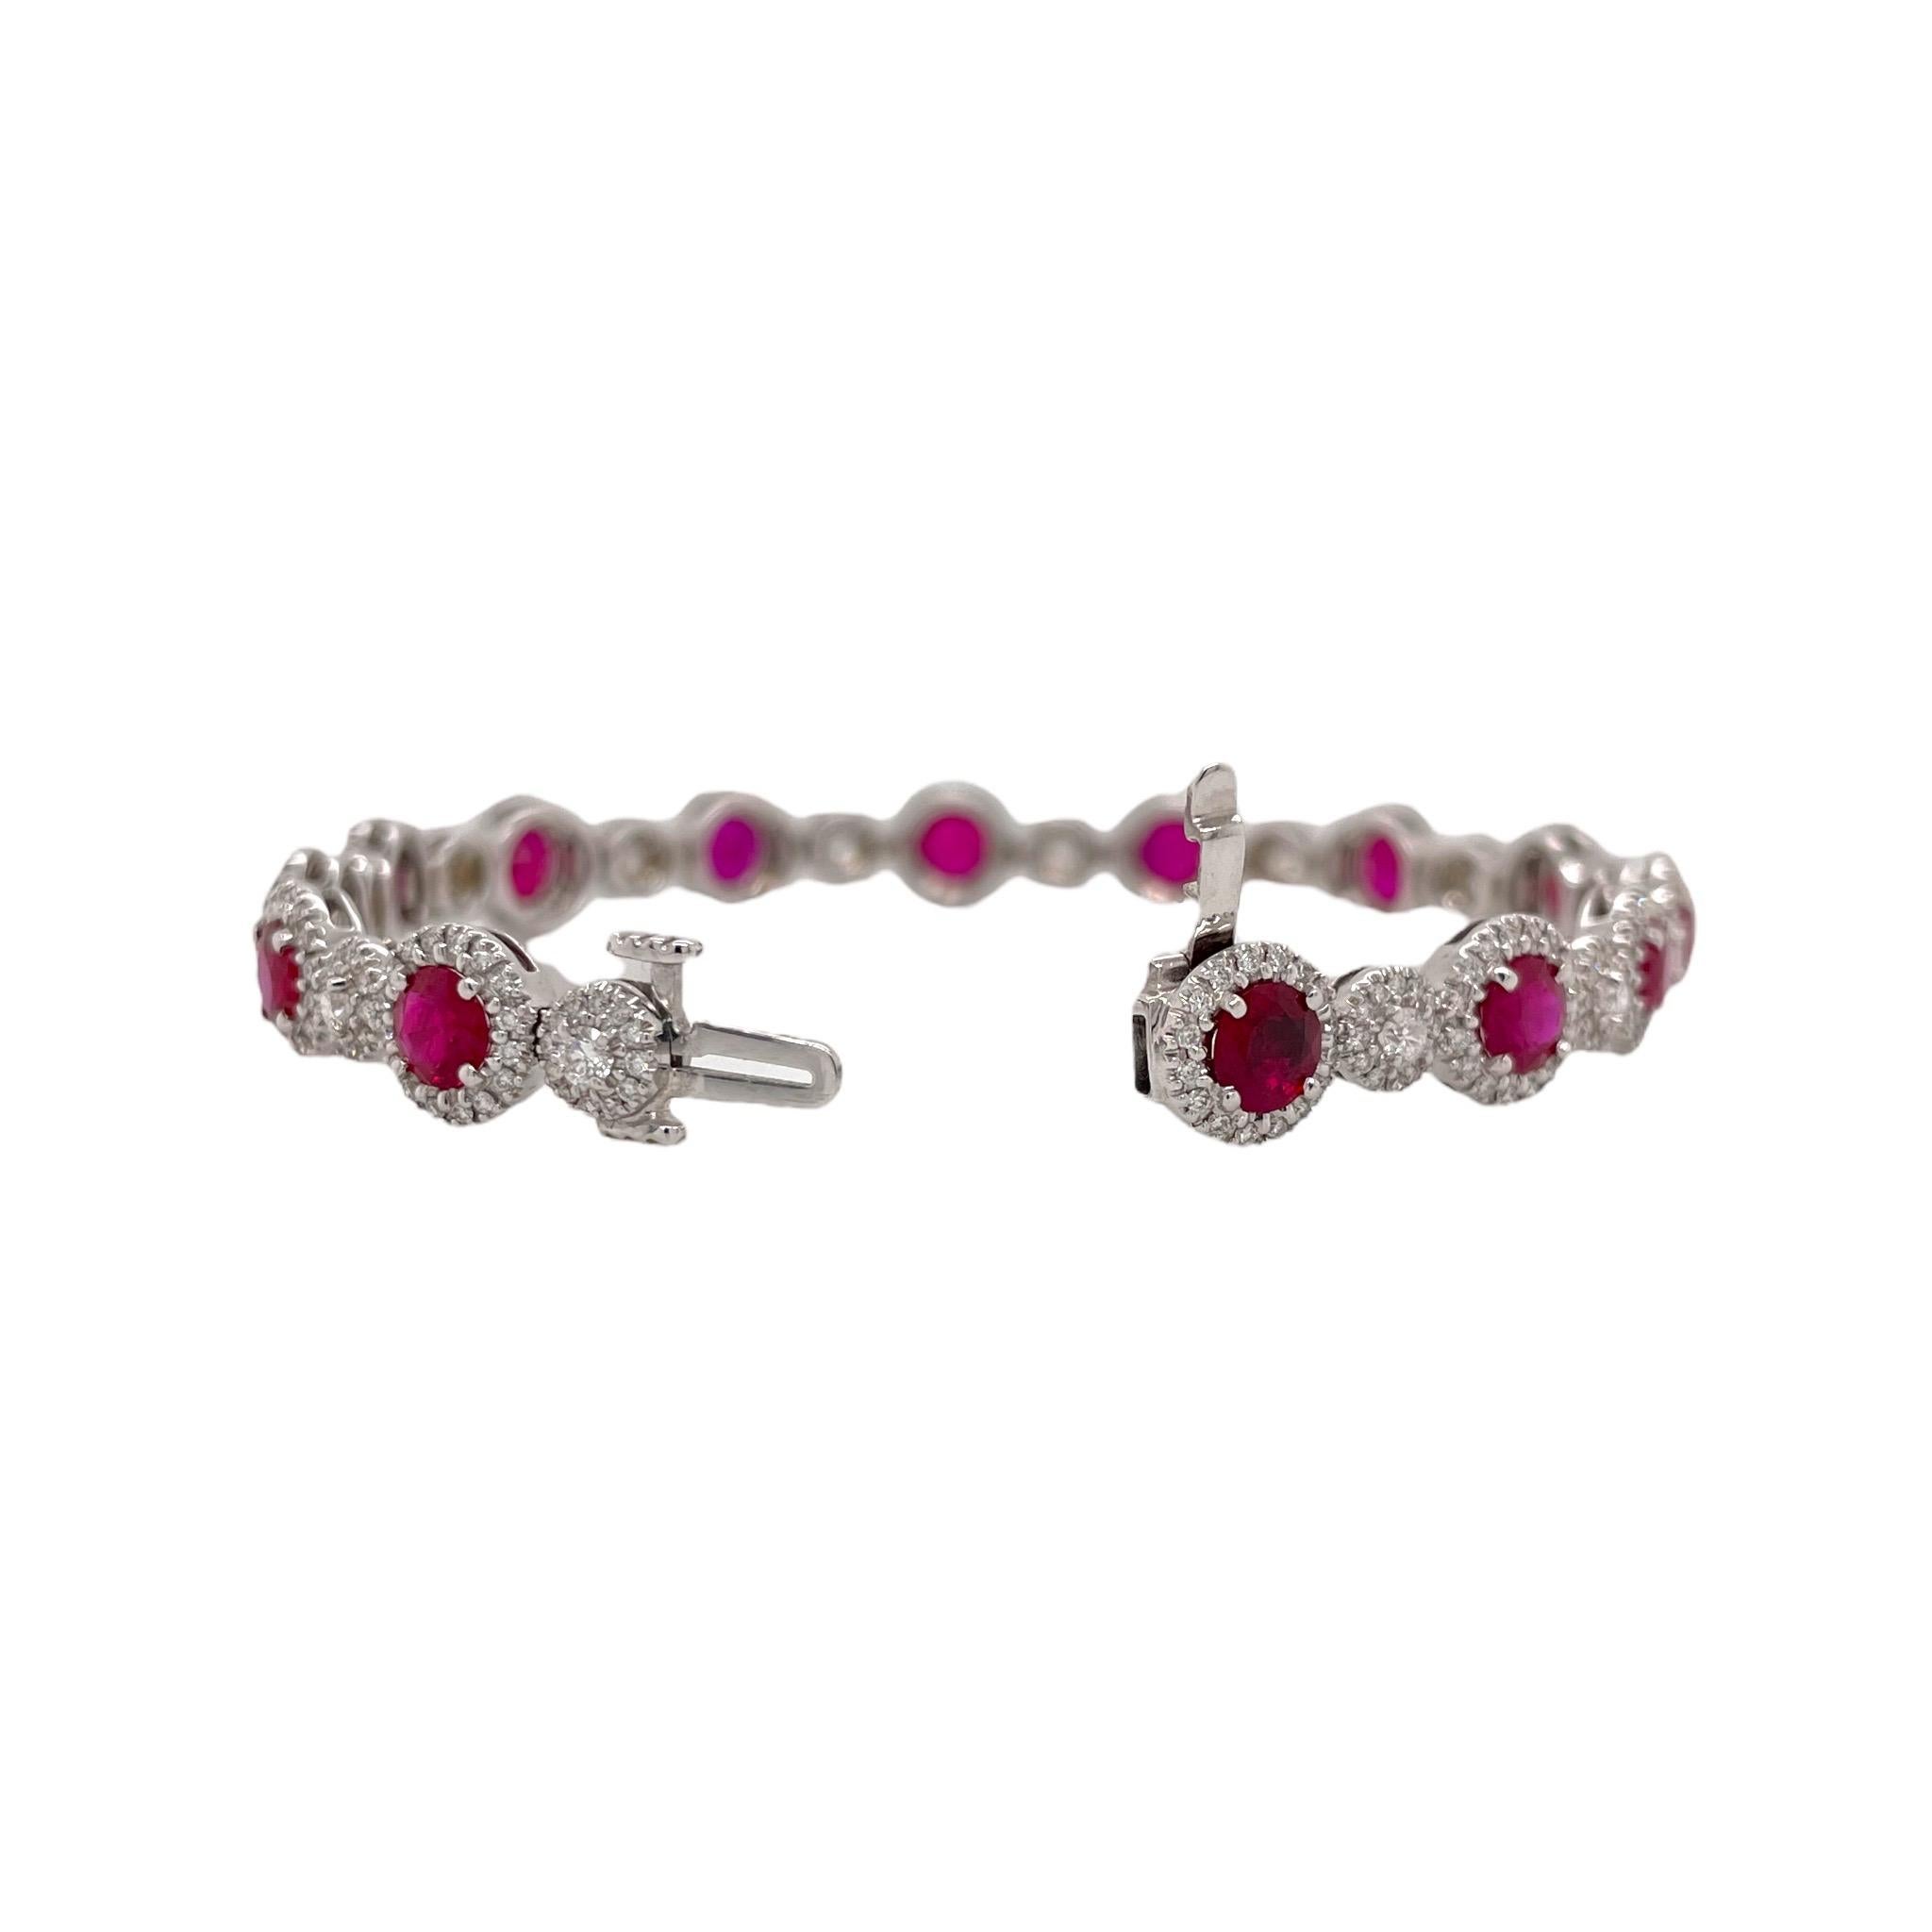 Elegant ruby and diamond bracelet contains 14 round brilliant rubies weighing a total of 6.75ct. Rubies are accented by diamond halos and min diamond clusters totaling 2.25cts. Diamonds are near colorless and VS2 in clarity. All stones are mounted